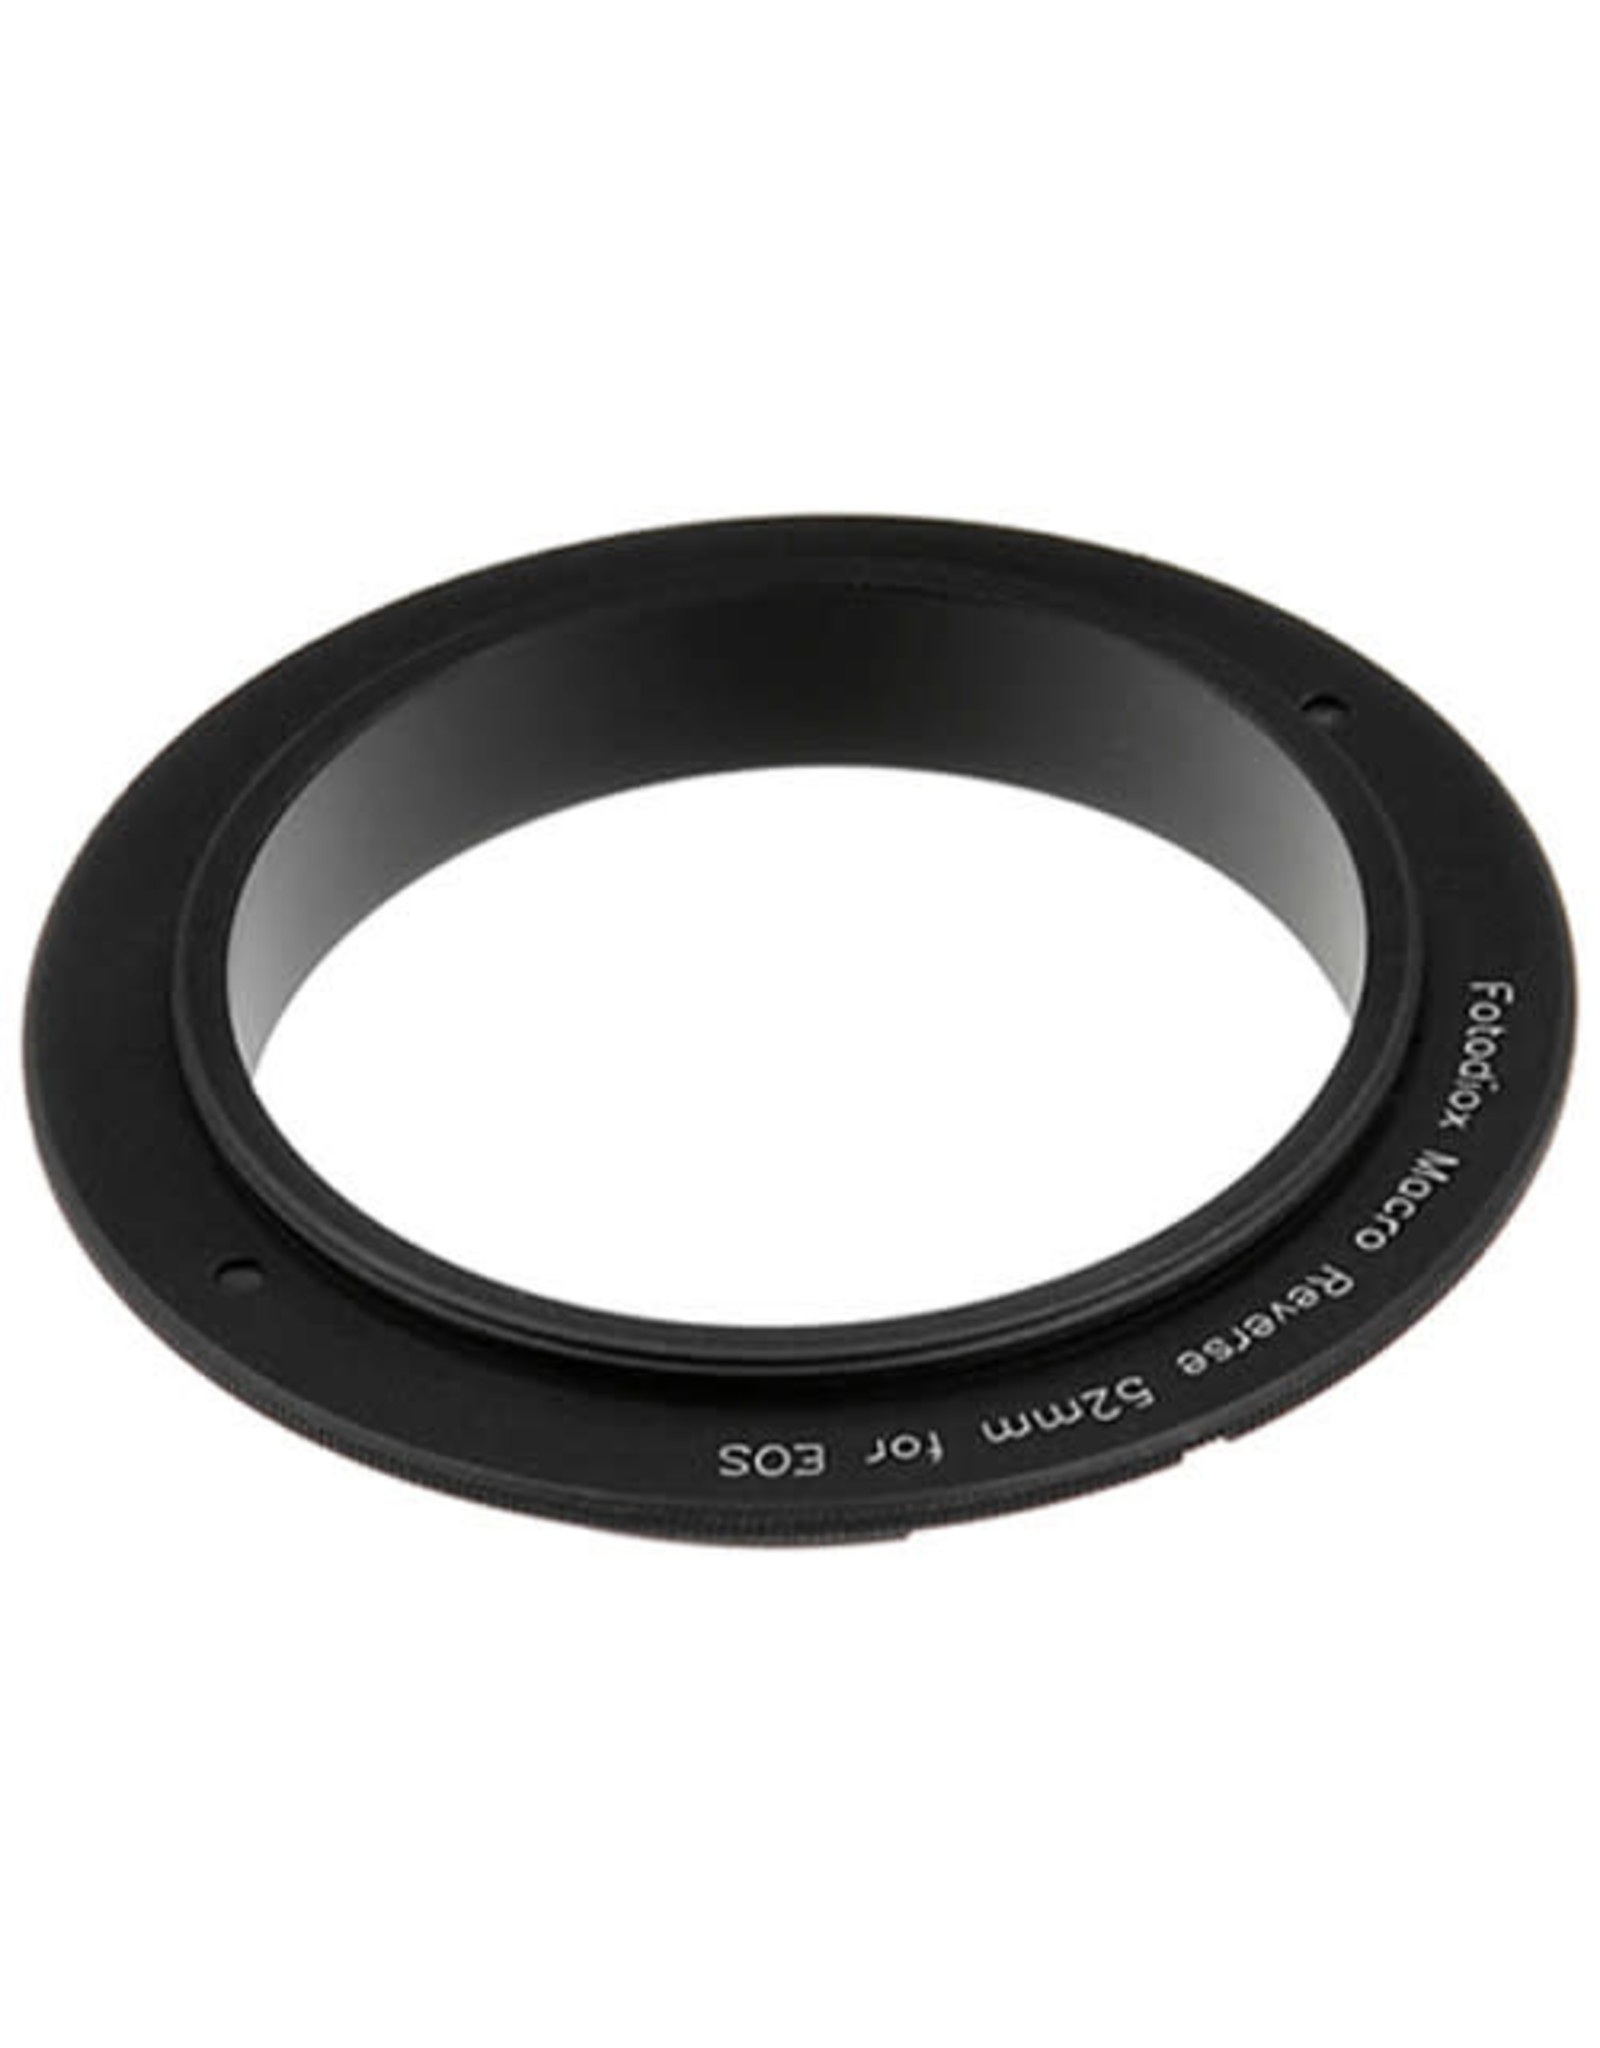 FotodioX 52mm Reverse Mount Macro Adapter Ring for Canon EF-Mount Cameras